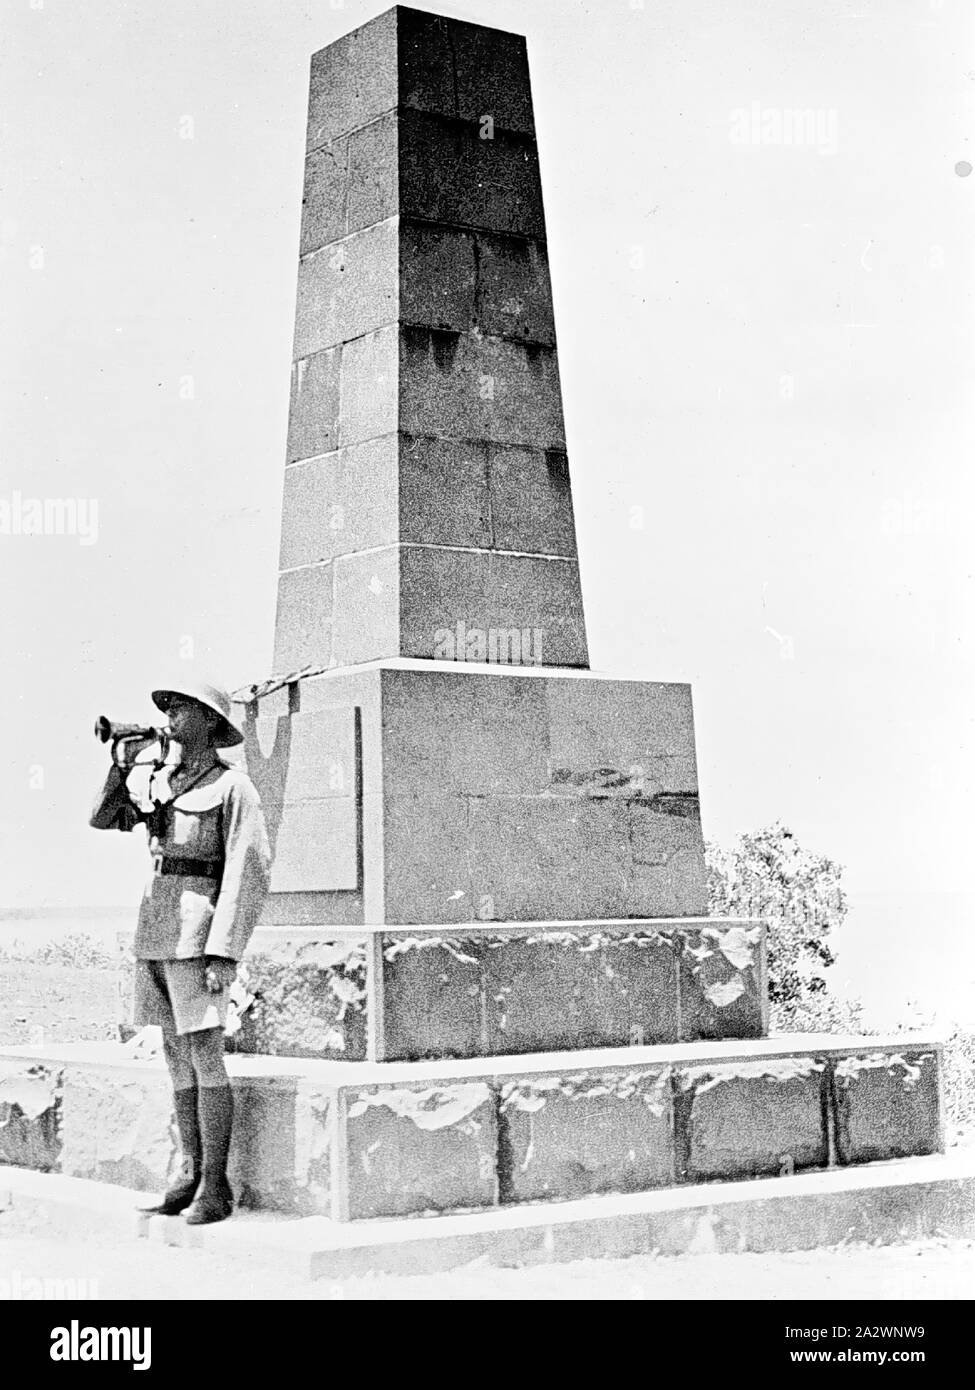 Negative - Darwin, Northern Territory, Nov 1933, Sounding the 'Last Post' on Armistice Day. The soldier, Gunner Dance, is standing by the Ross Smith Memorial at Fanny Bay. The memorial commemorates the feat of Ross and Keith Smith in completing the first flight from England to Australia Stock Photo